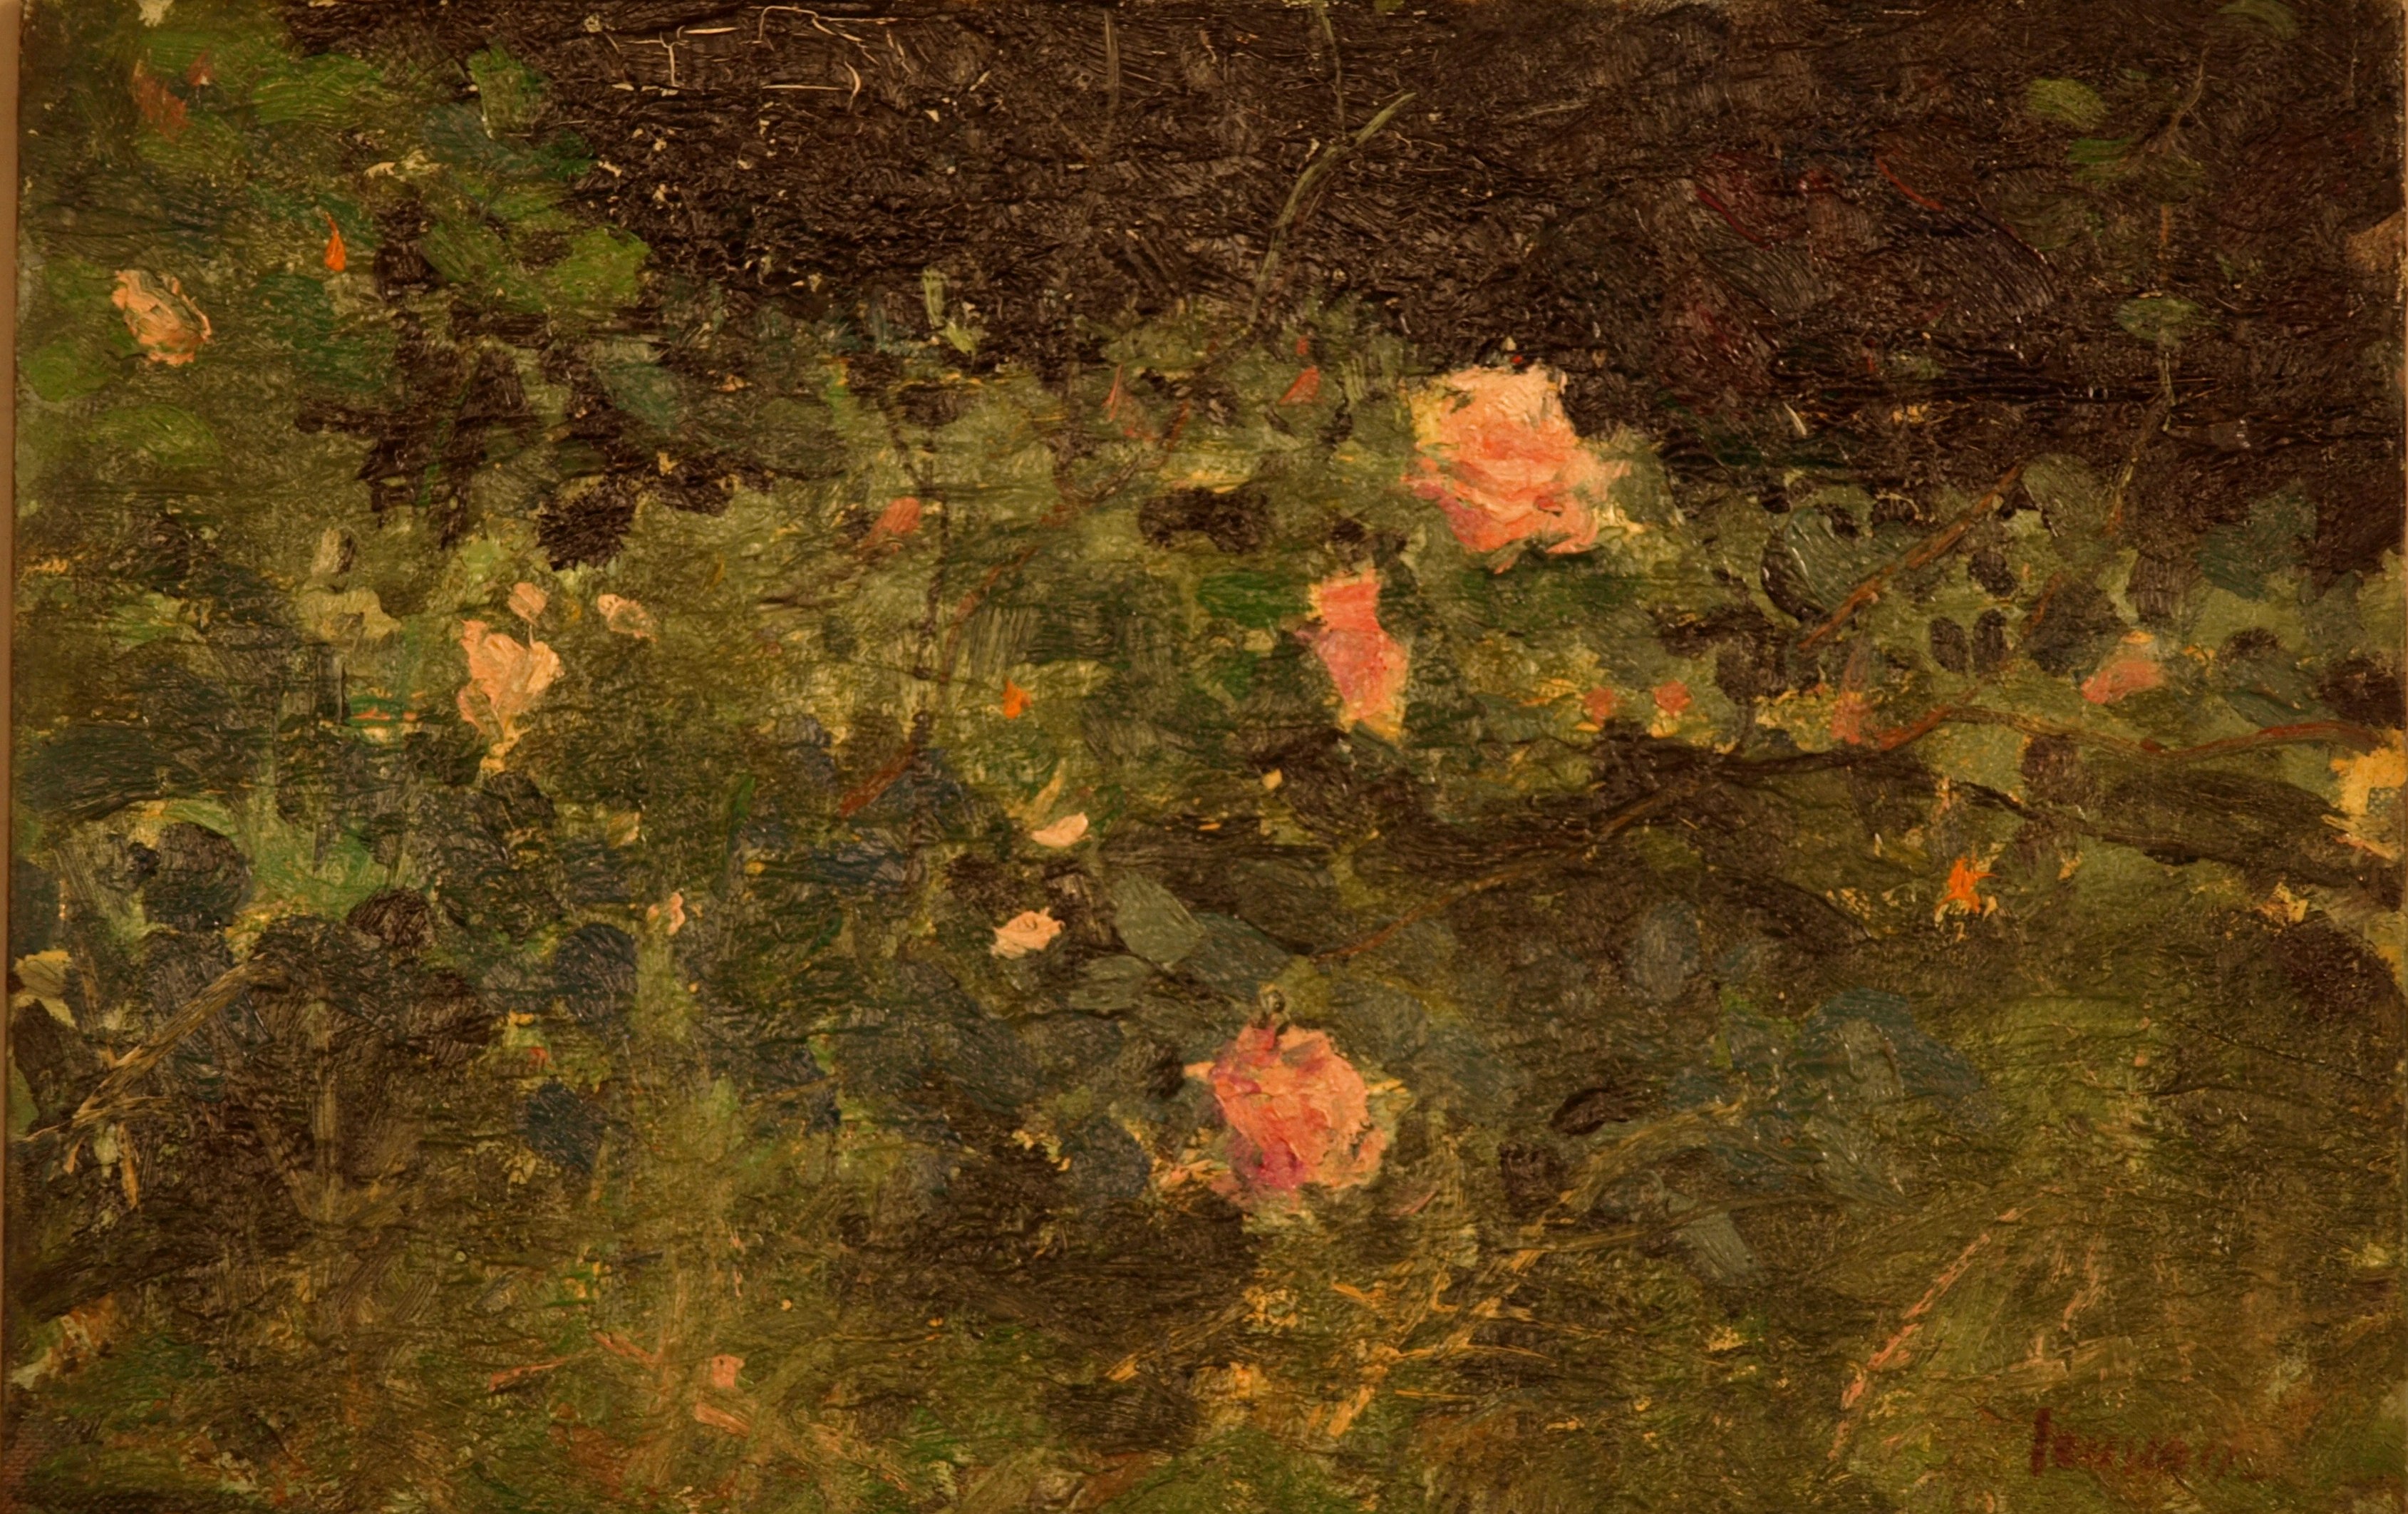 Wild Roses, Oil on Board, 8 x 12 Inches, by Bernard Lennon, $1000